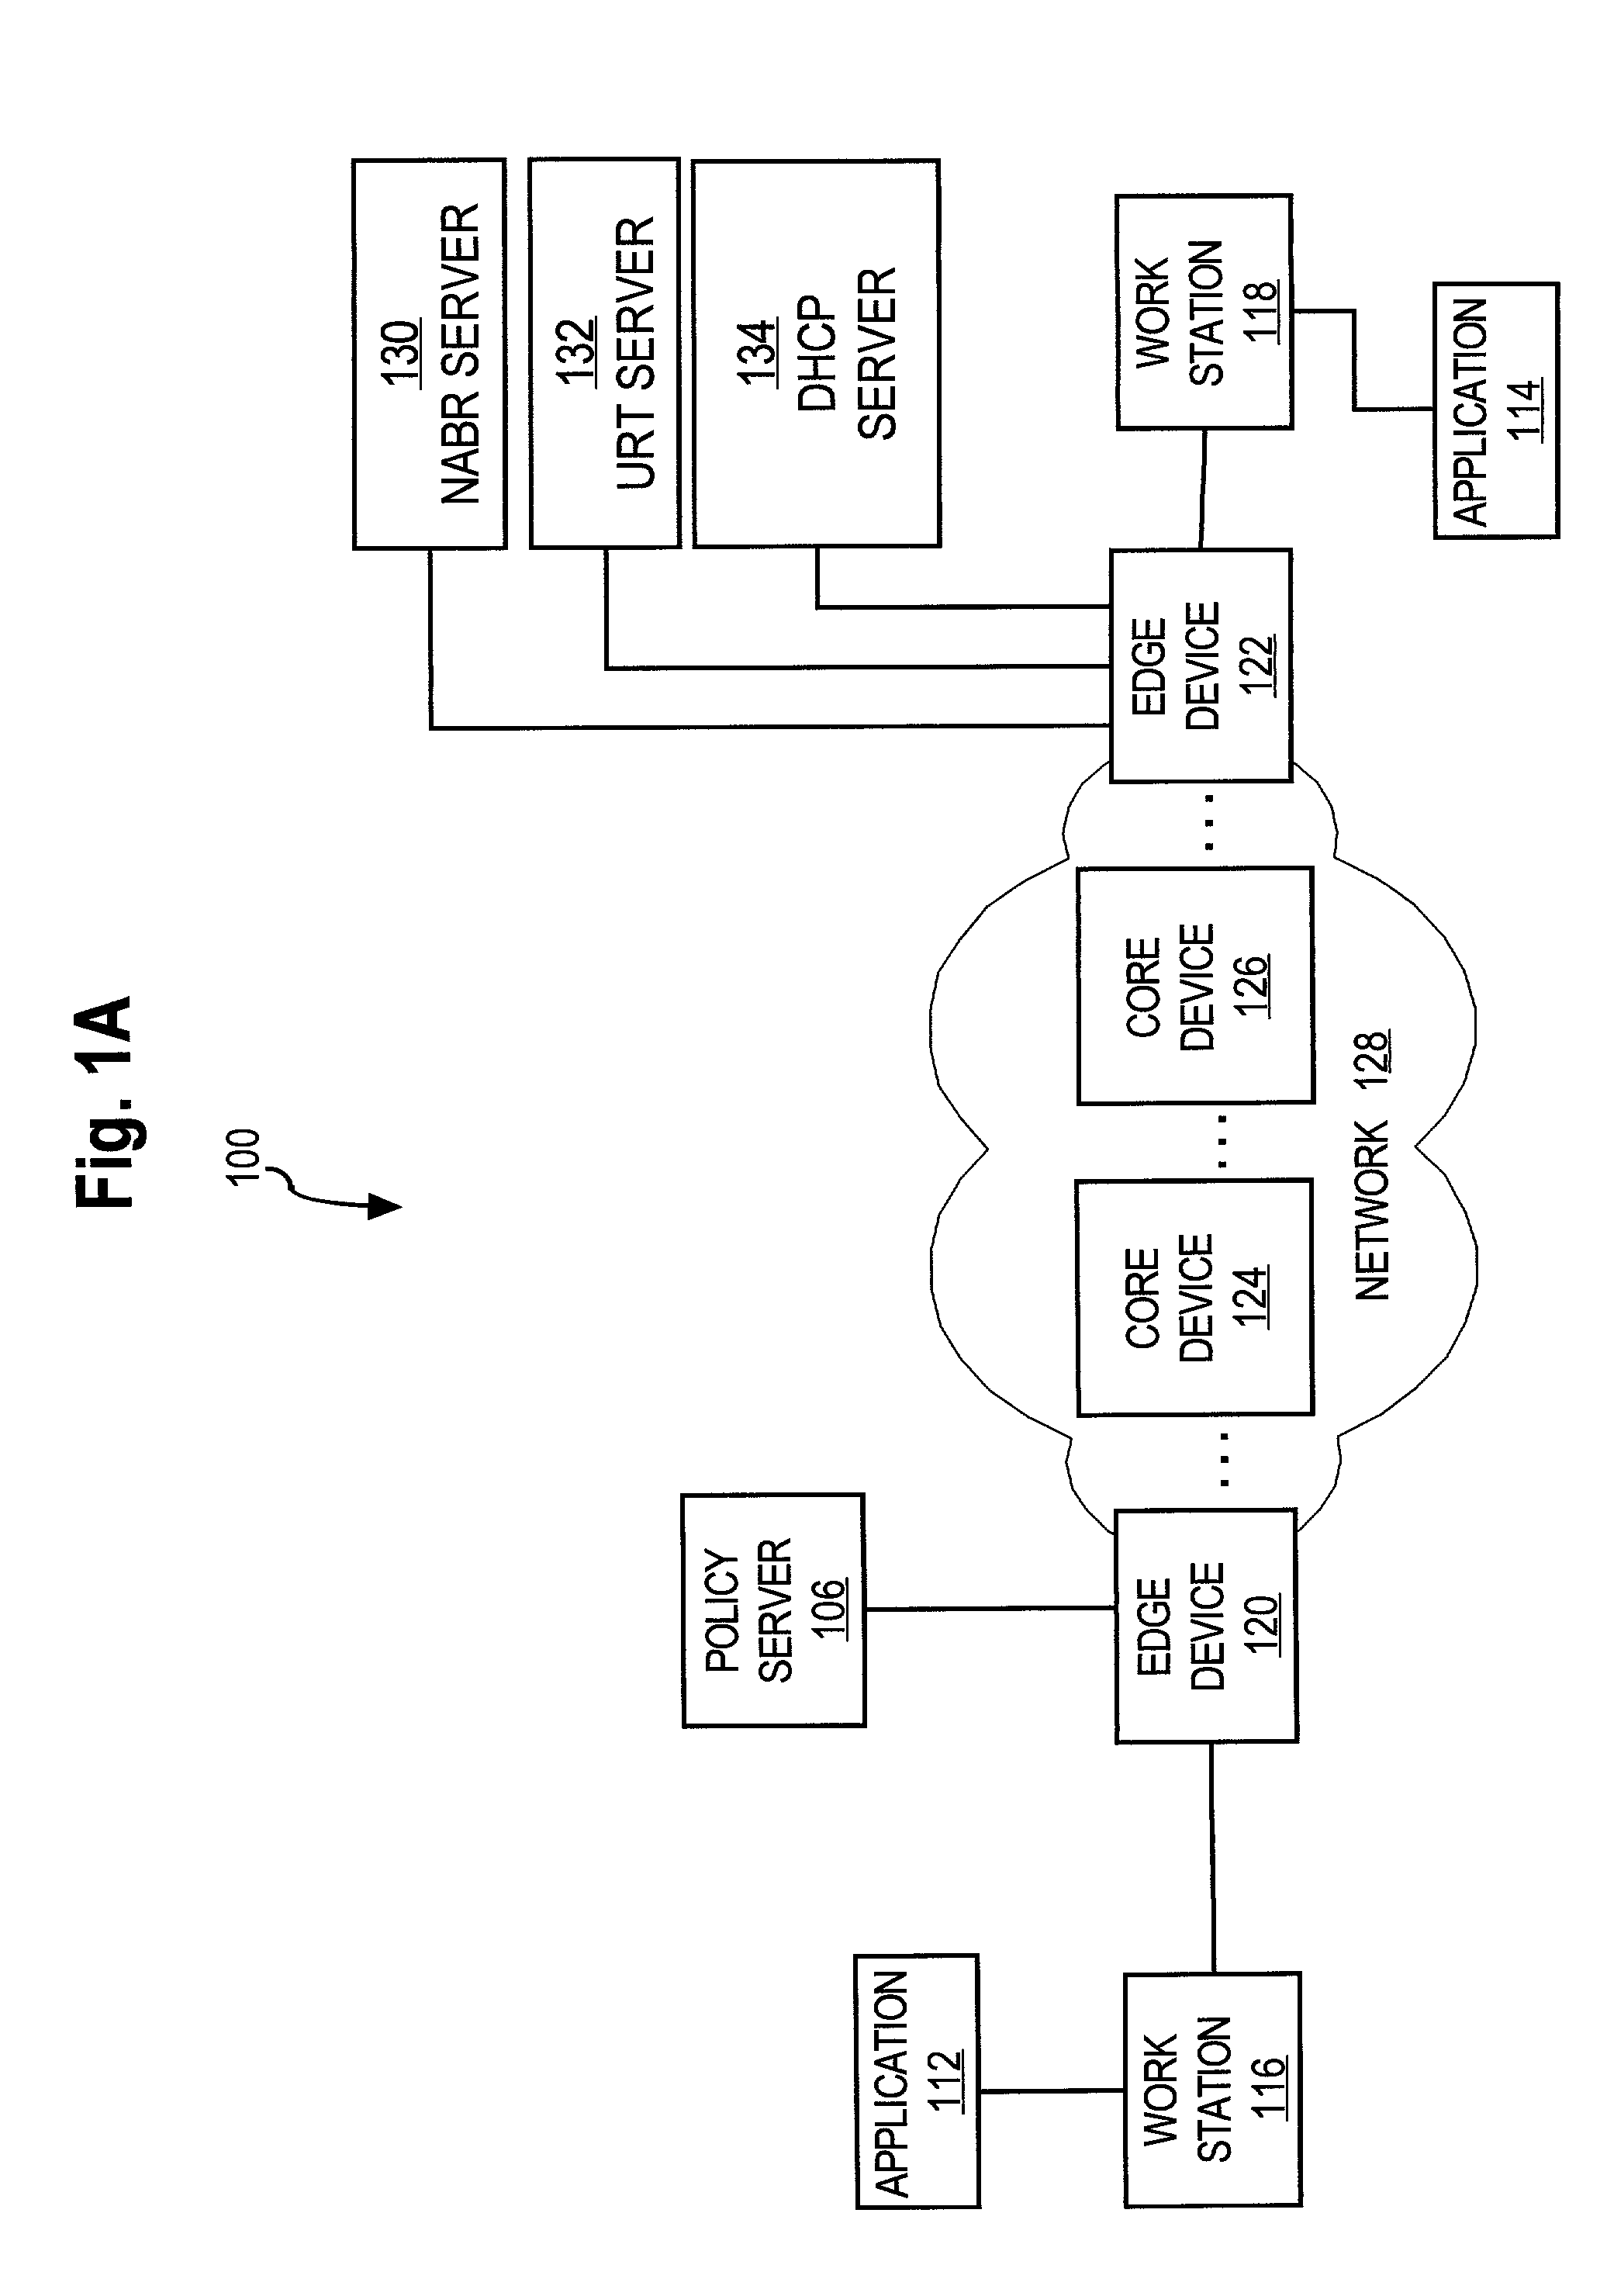 Method and apparatus for selectively enforcing network security policies using group identifiers